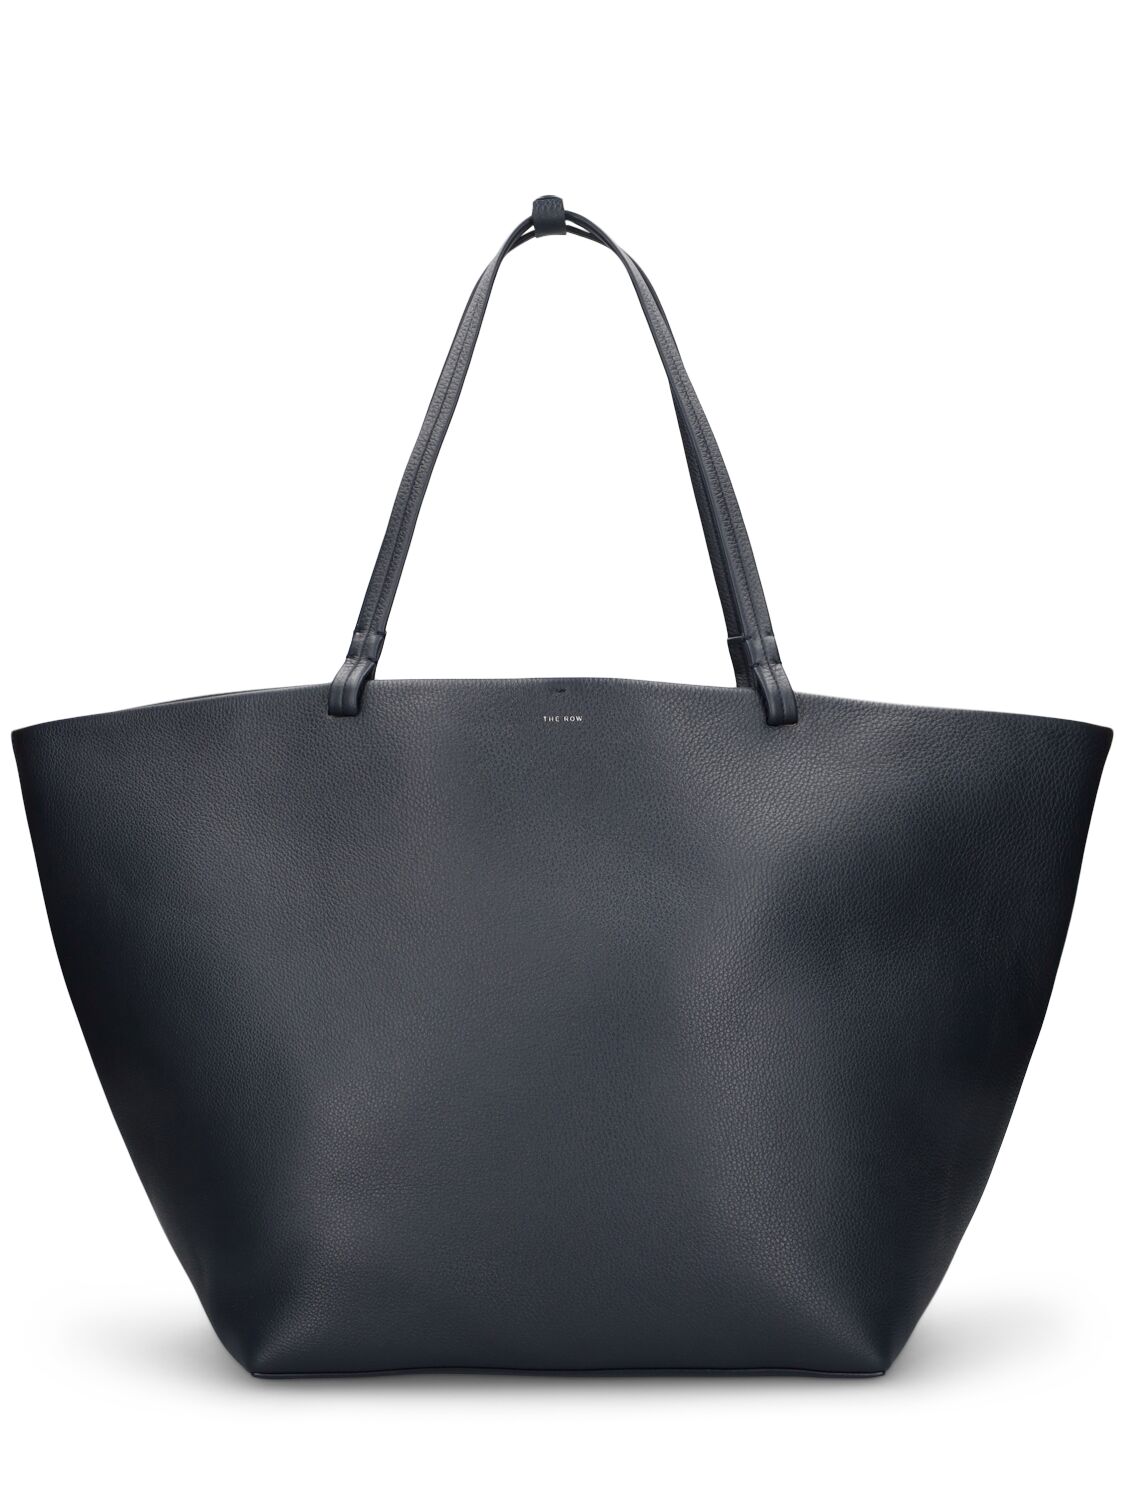 Image of Xl Leather Park Tote